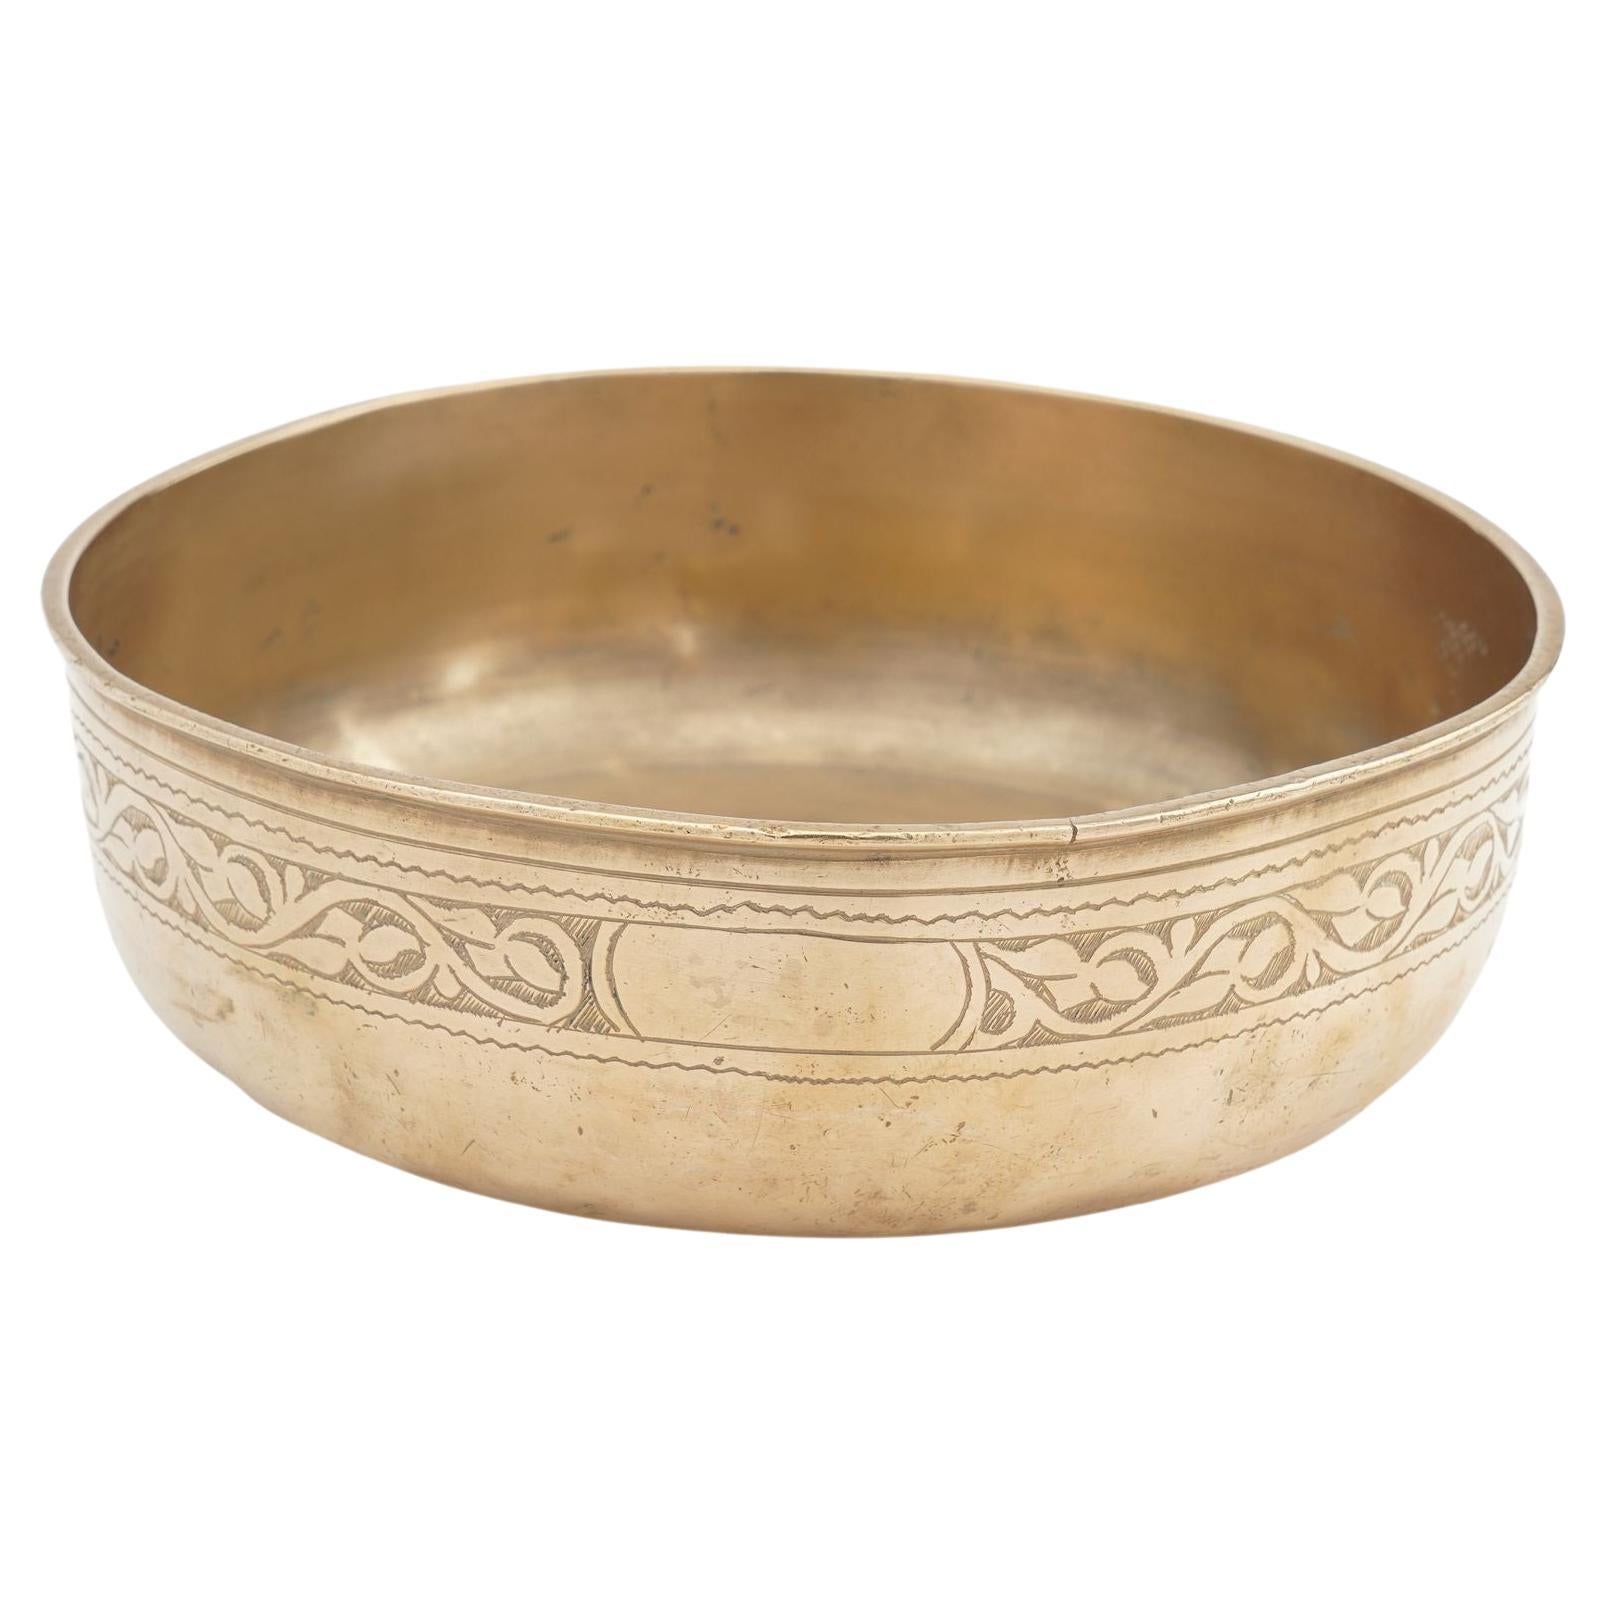 Continental cast & turned bronze basin, 1800's